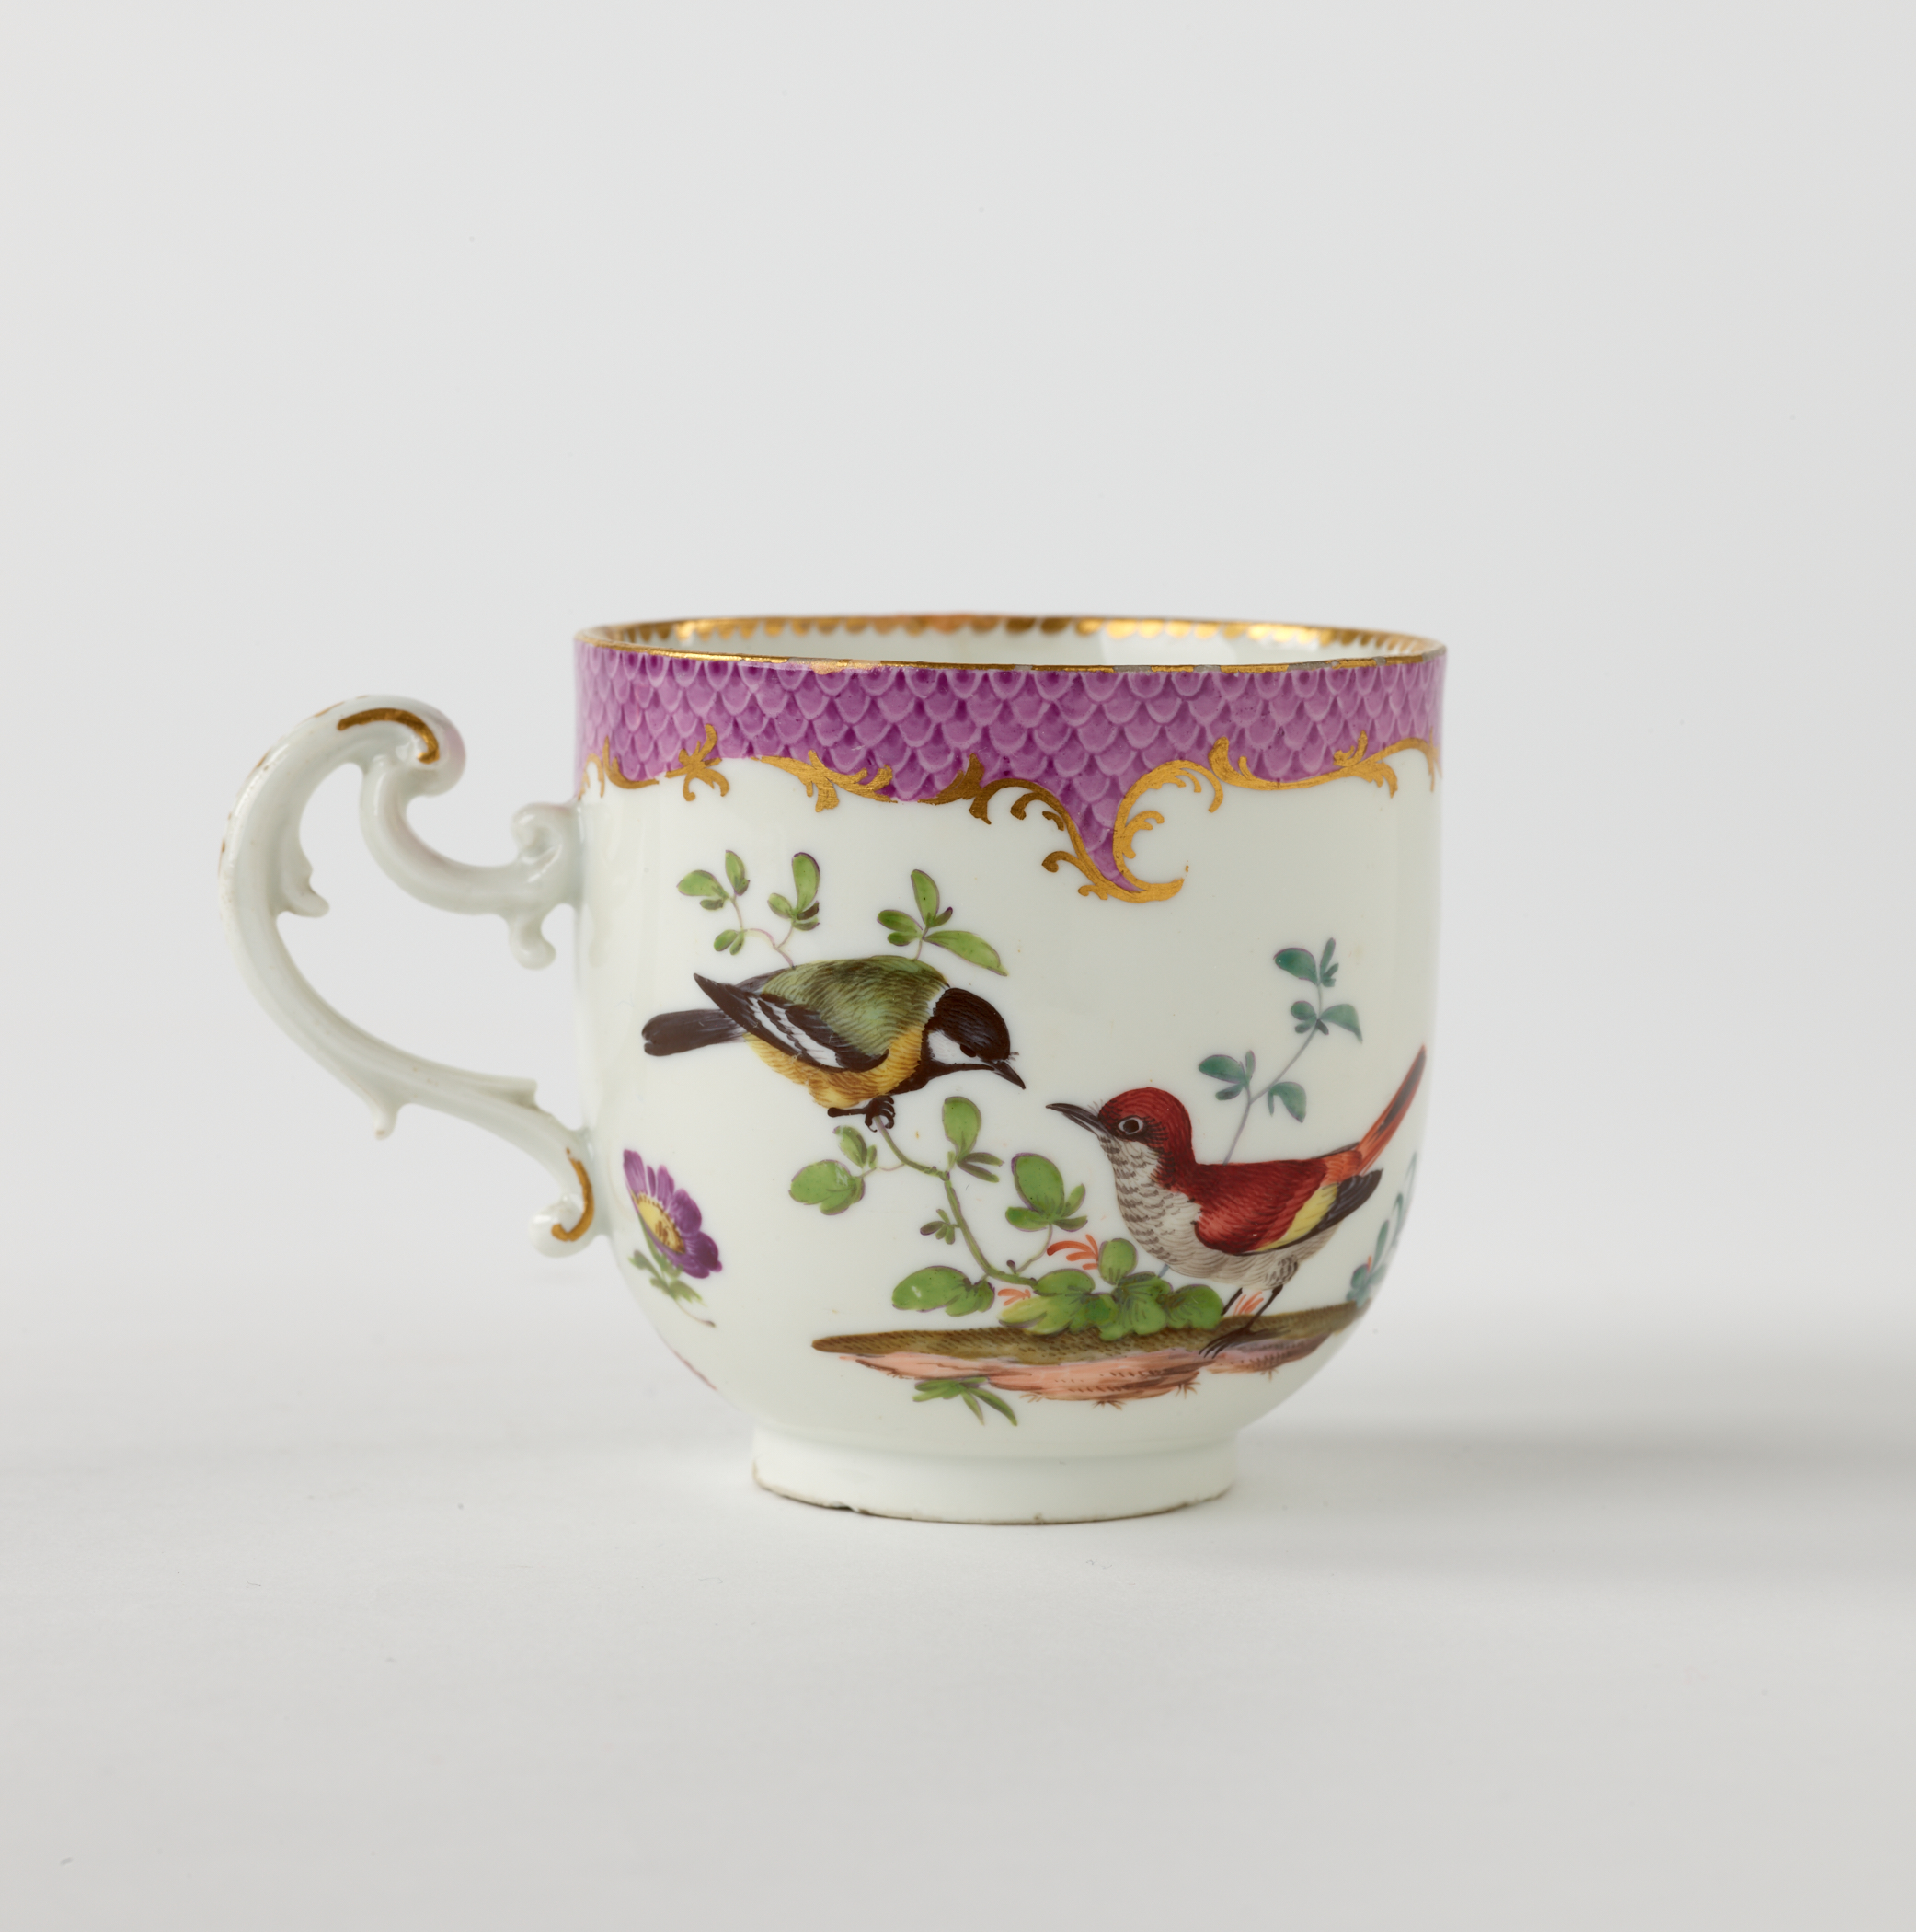 /A%20white%20teacup%20with%20a%20handle%20that%20has%20swirls%2C%20gilding%2C%20pink%2C%20and%20floral%20decorations.%20There%20are%20two%20birds%2C%20one%20gray%20and%20yellow%2C%20the%20other%20is%20larger%20and%20mainly%20red.